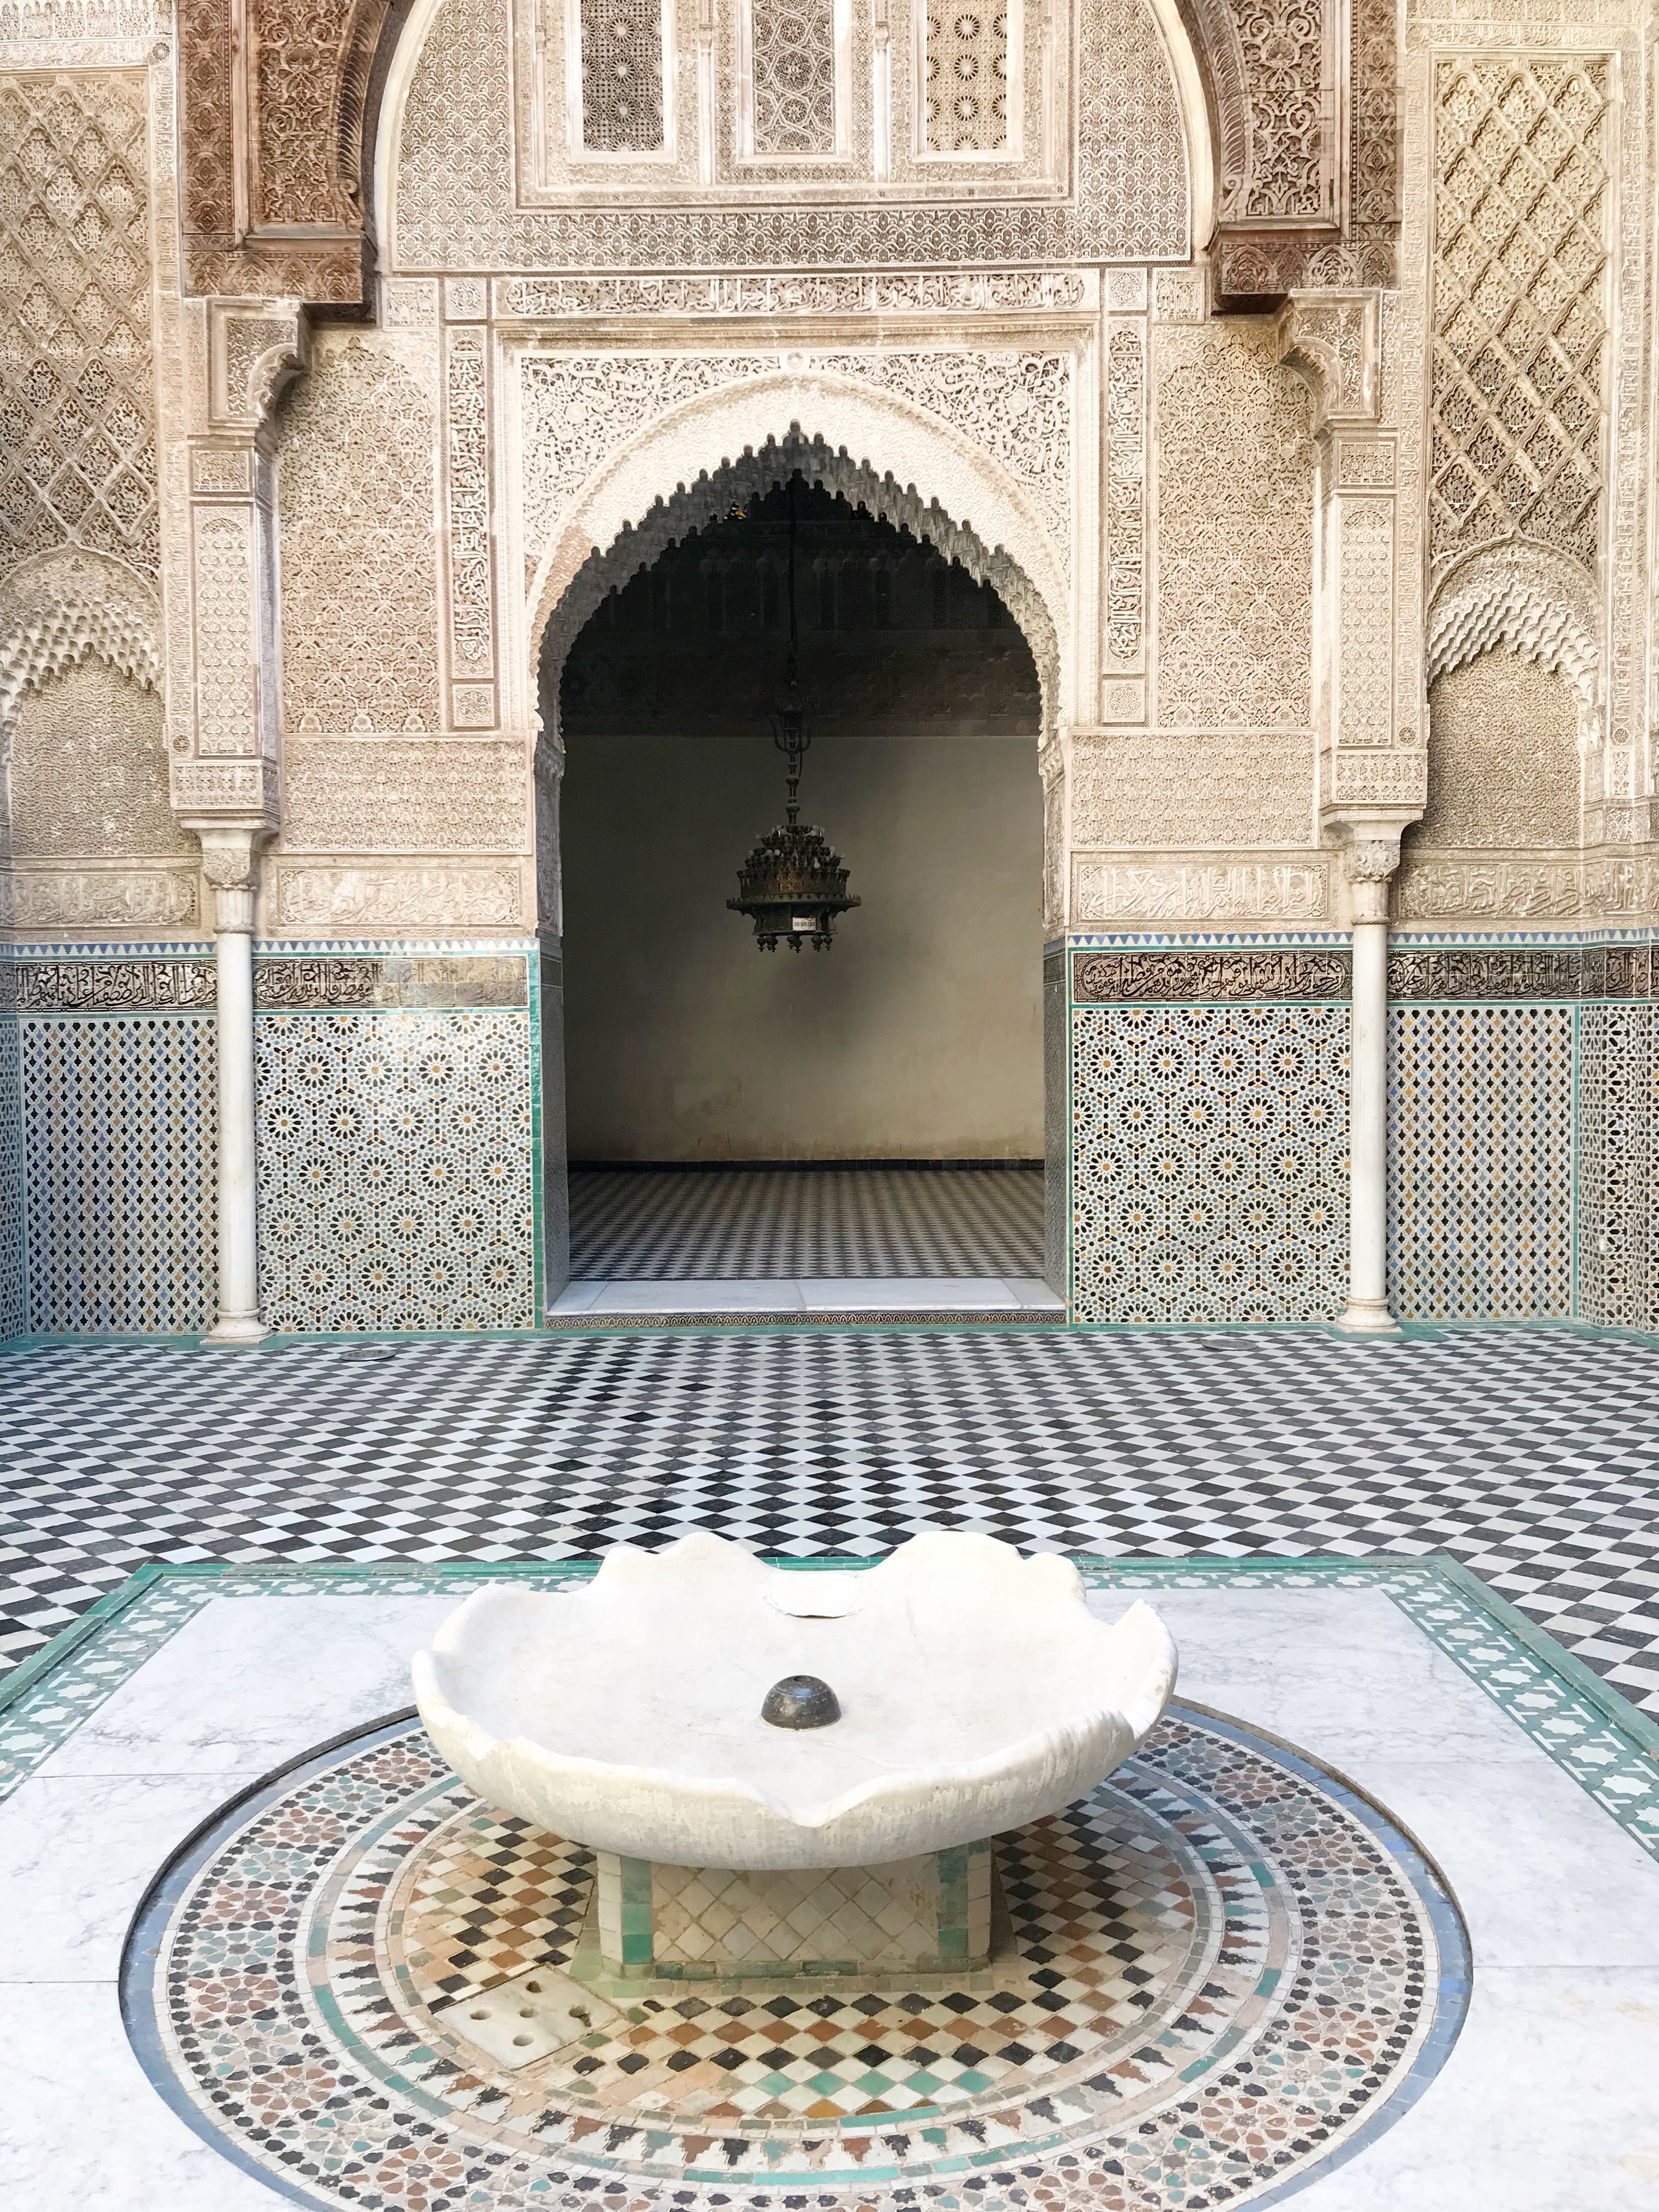 8 THINGS YOU CAN'T MISS IN FES, MOROCCO | Fez Morocco - Fes Morocco - Fes Tanneries - Morocco Travel Blog - Hotels In Fes Morocco - Morocco Travel Guide - Guide To Fes Morocco - What To Do In Morocco - Morocco Travel Itinerary - Planning A Trip To Morocco - Medersa Bou Inania - #morocco #travel #fes